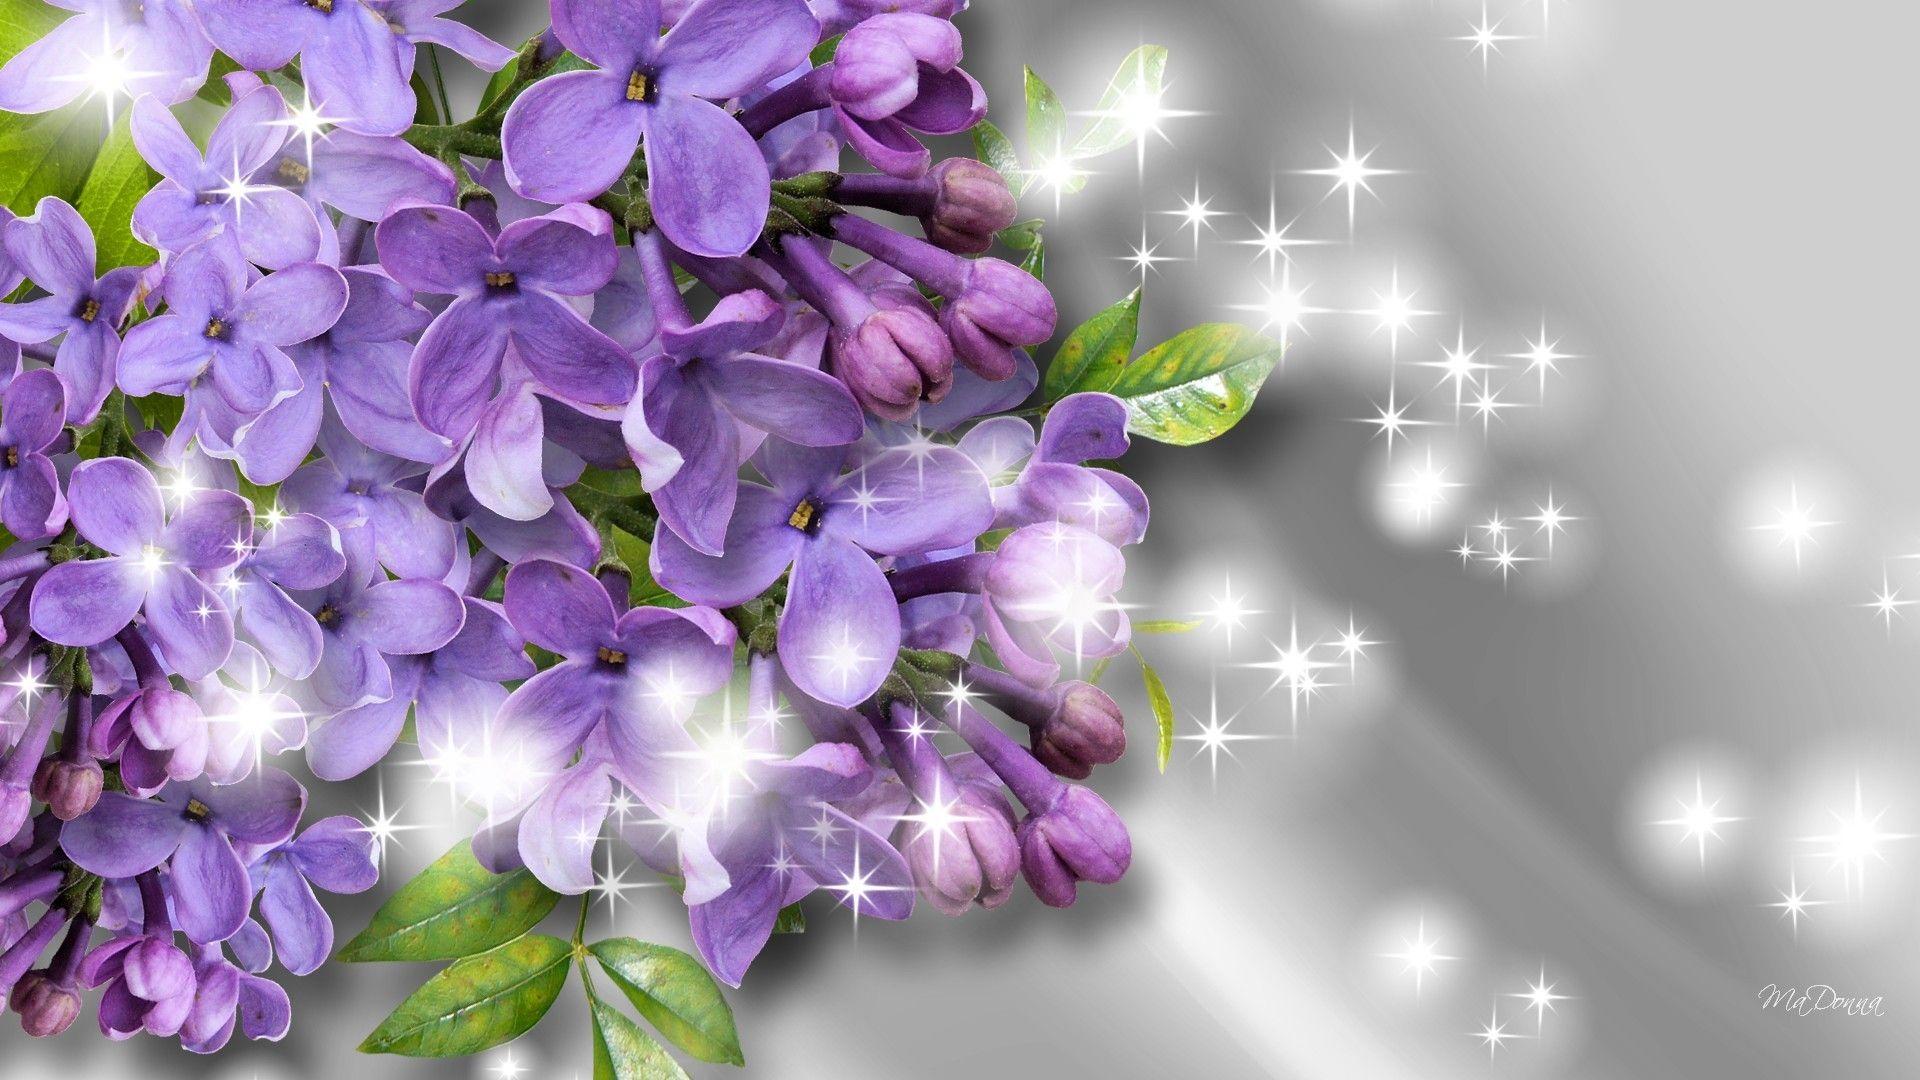 Fragrance of the lilacs wallpaper. PC